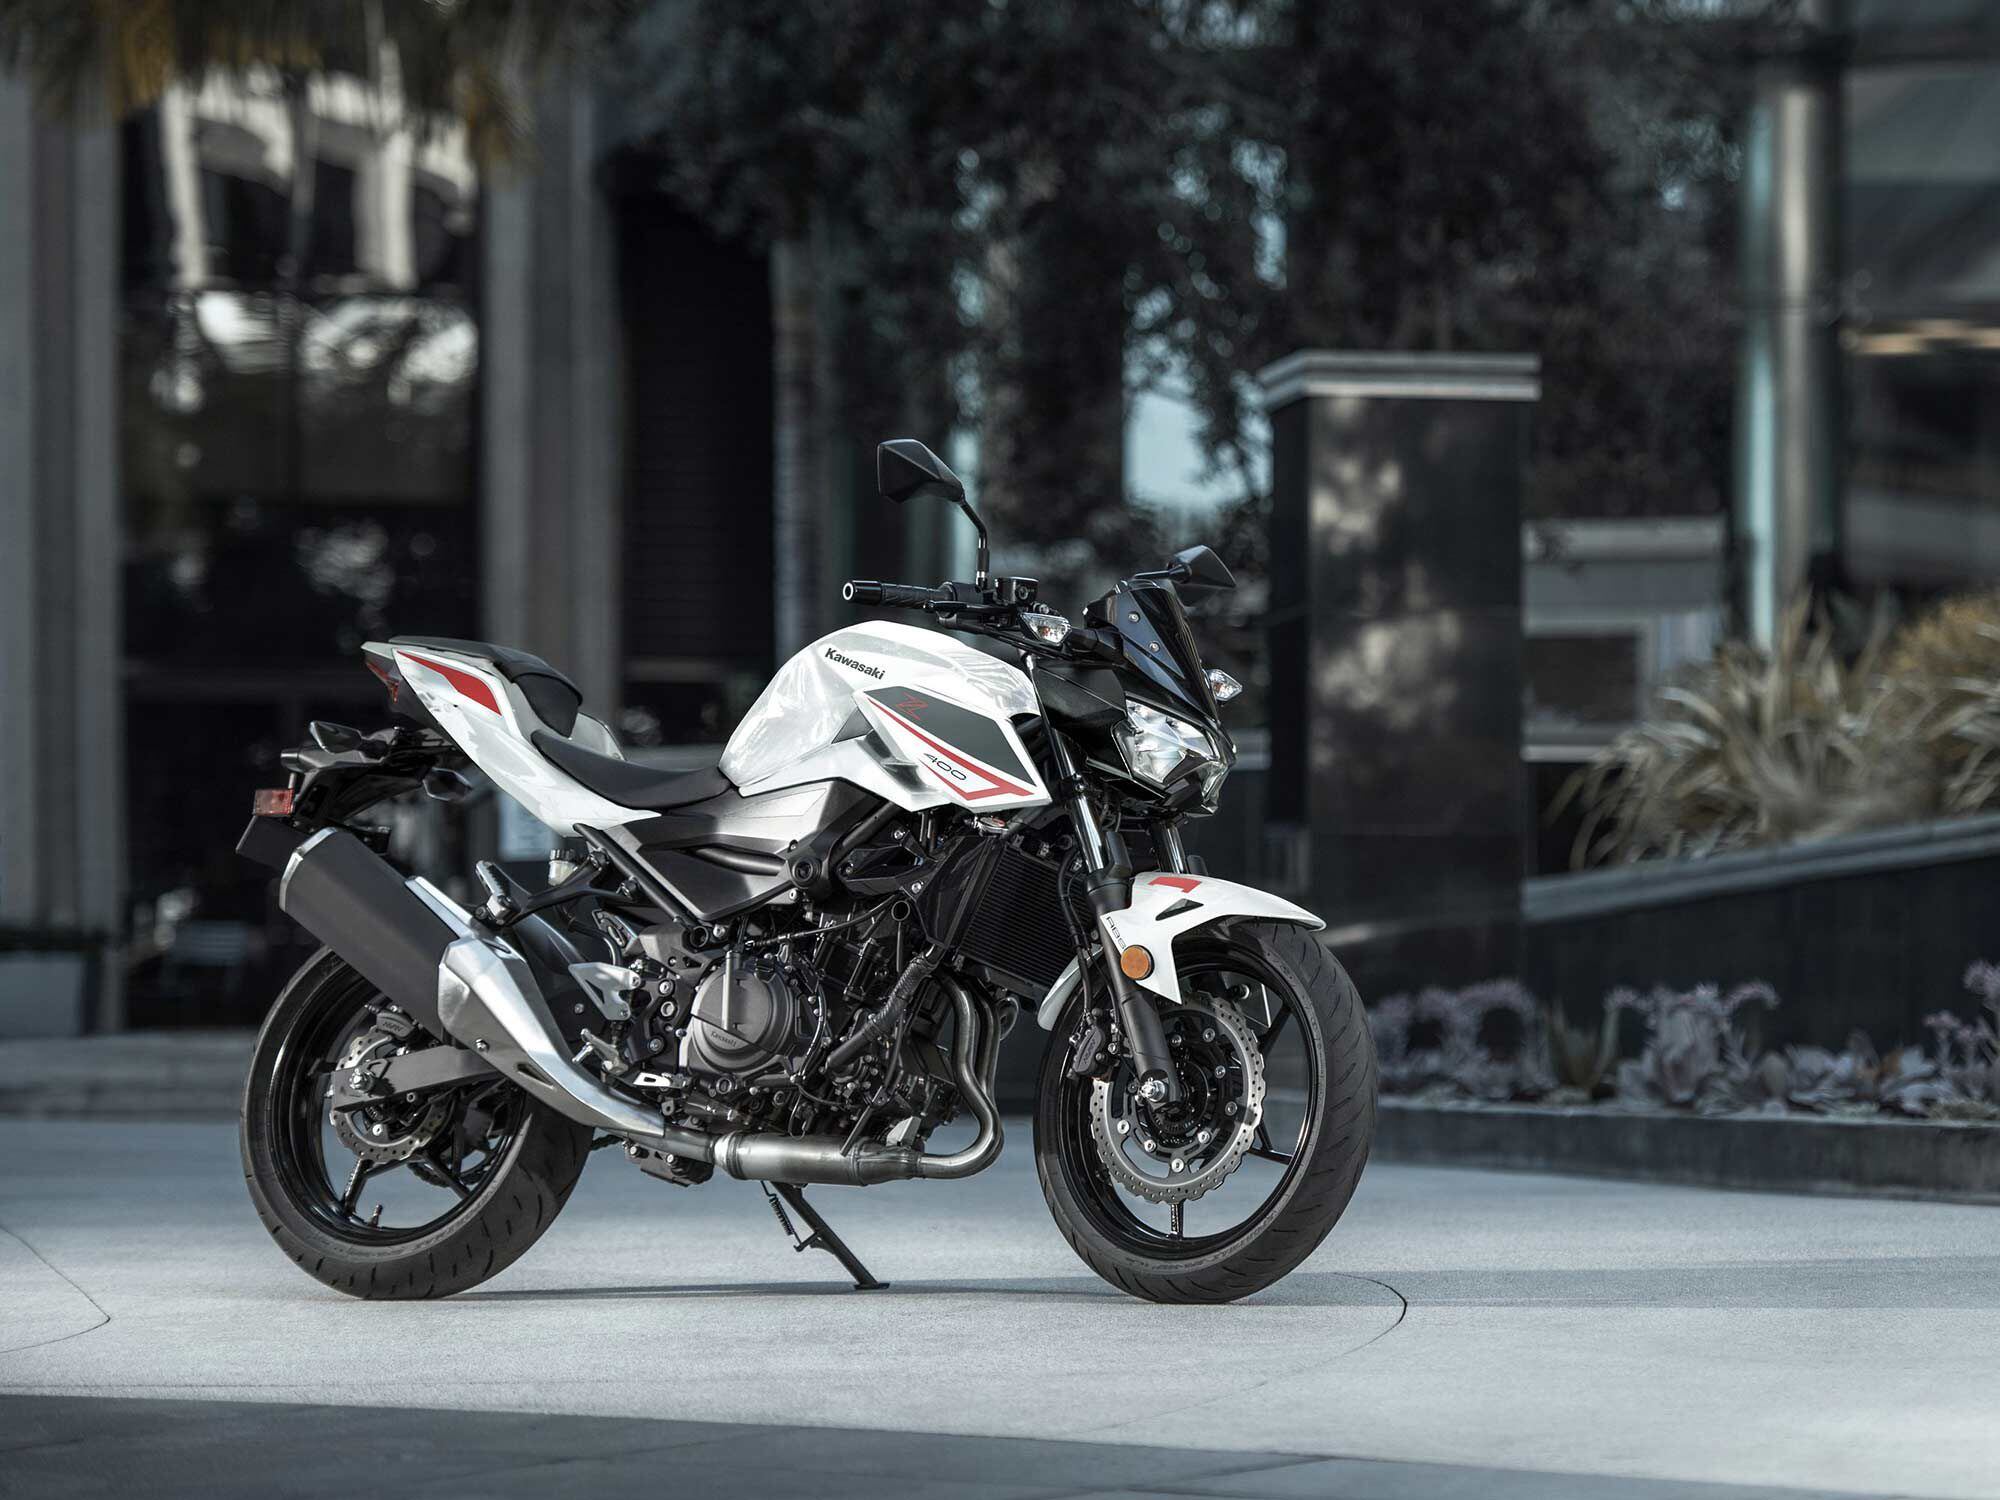 Very few sub-500cc motorcycles are as easy to approach for a new rider while also being easily up to the task of spirited rides at the hands of more experienced riders. The Kawasaki Z400 really is an amazing bang for the buck.